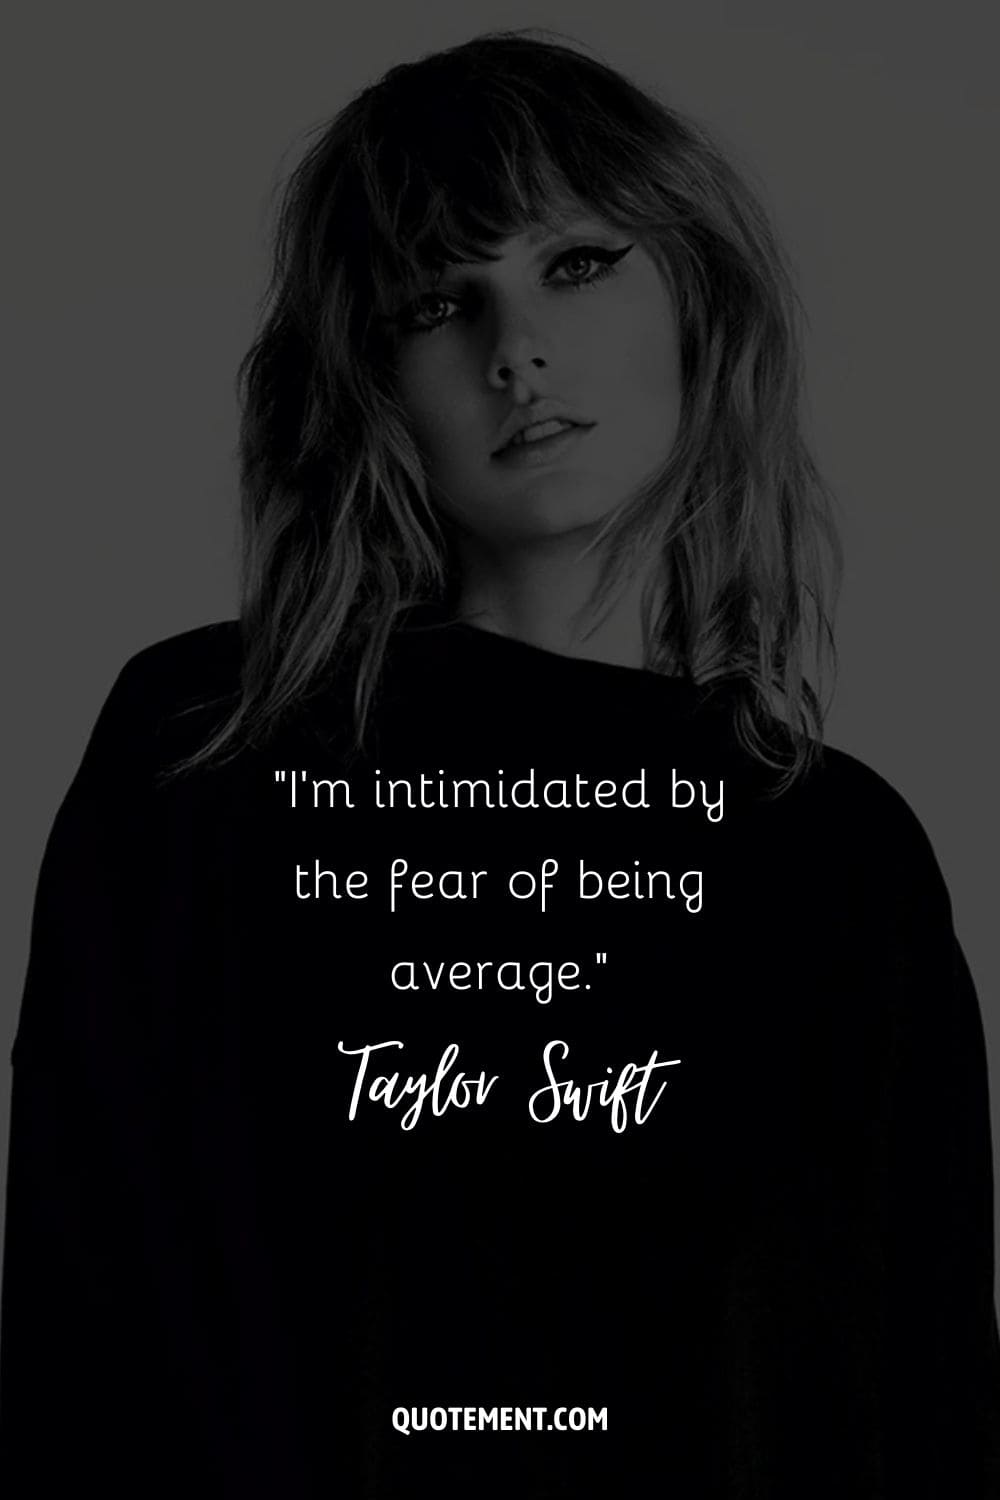 “I’m intimidated by the fear of being average.” ― Taylor Swift